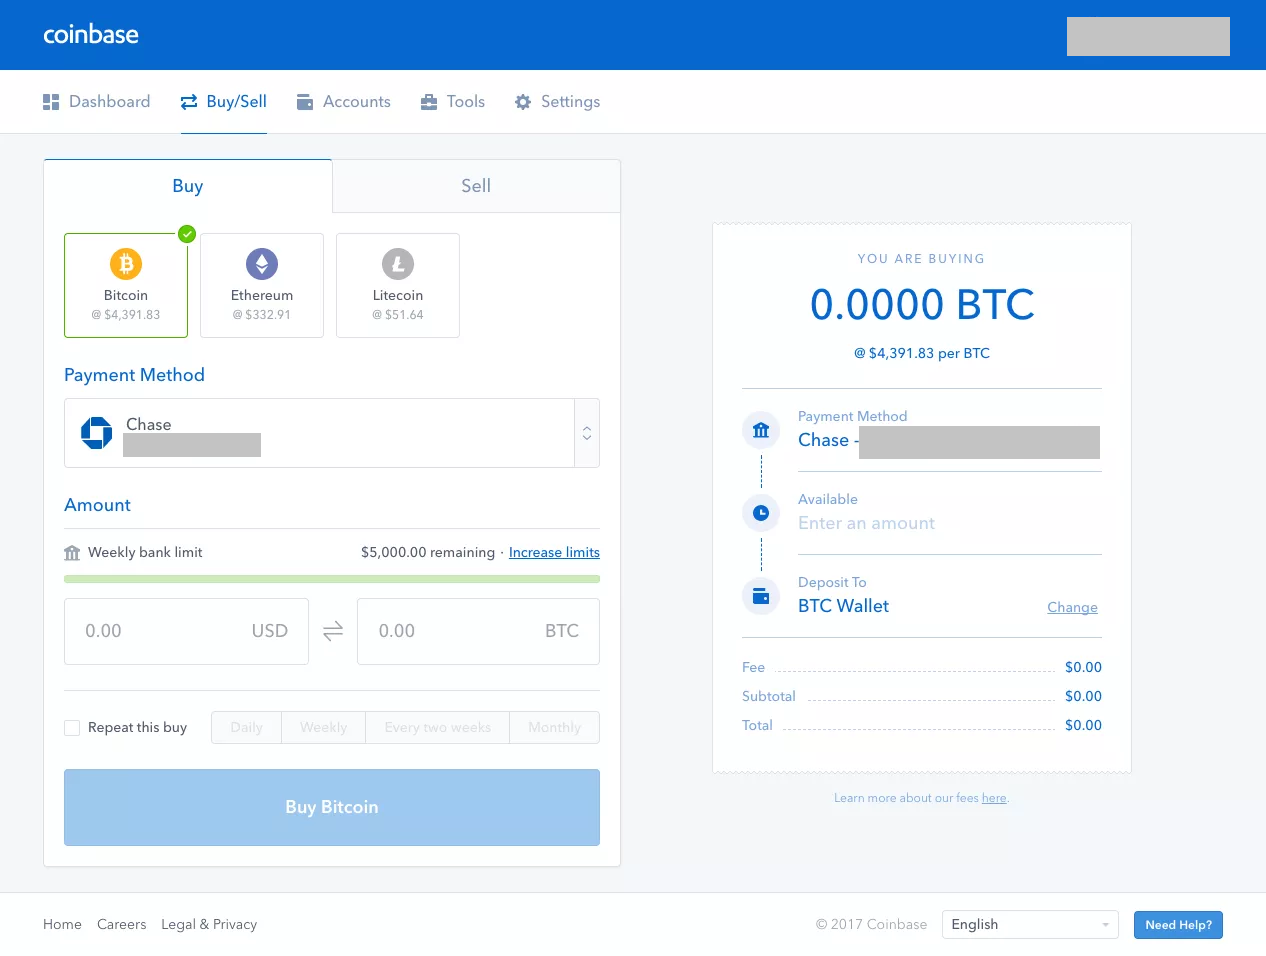 coinbase total deposits